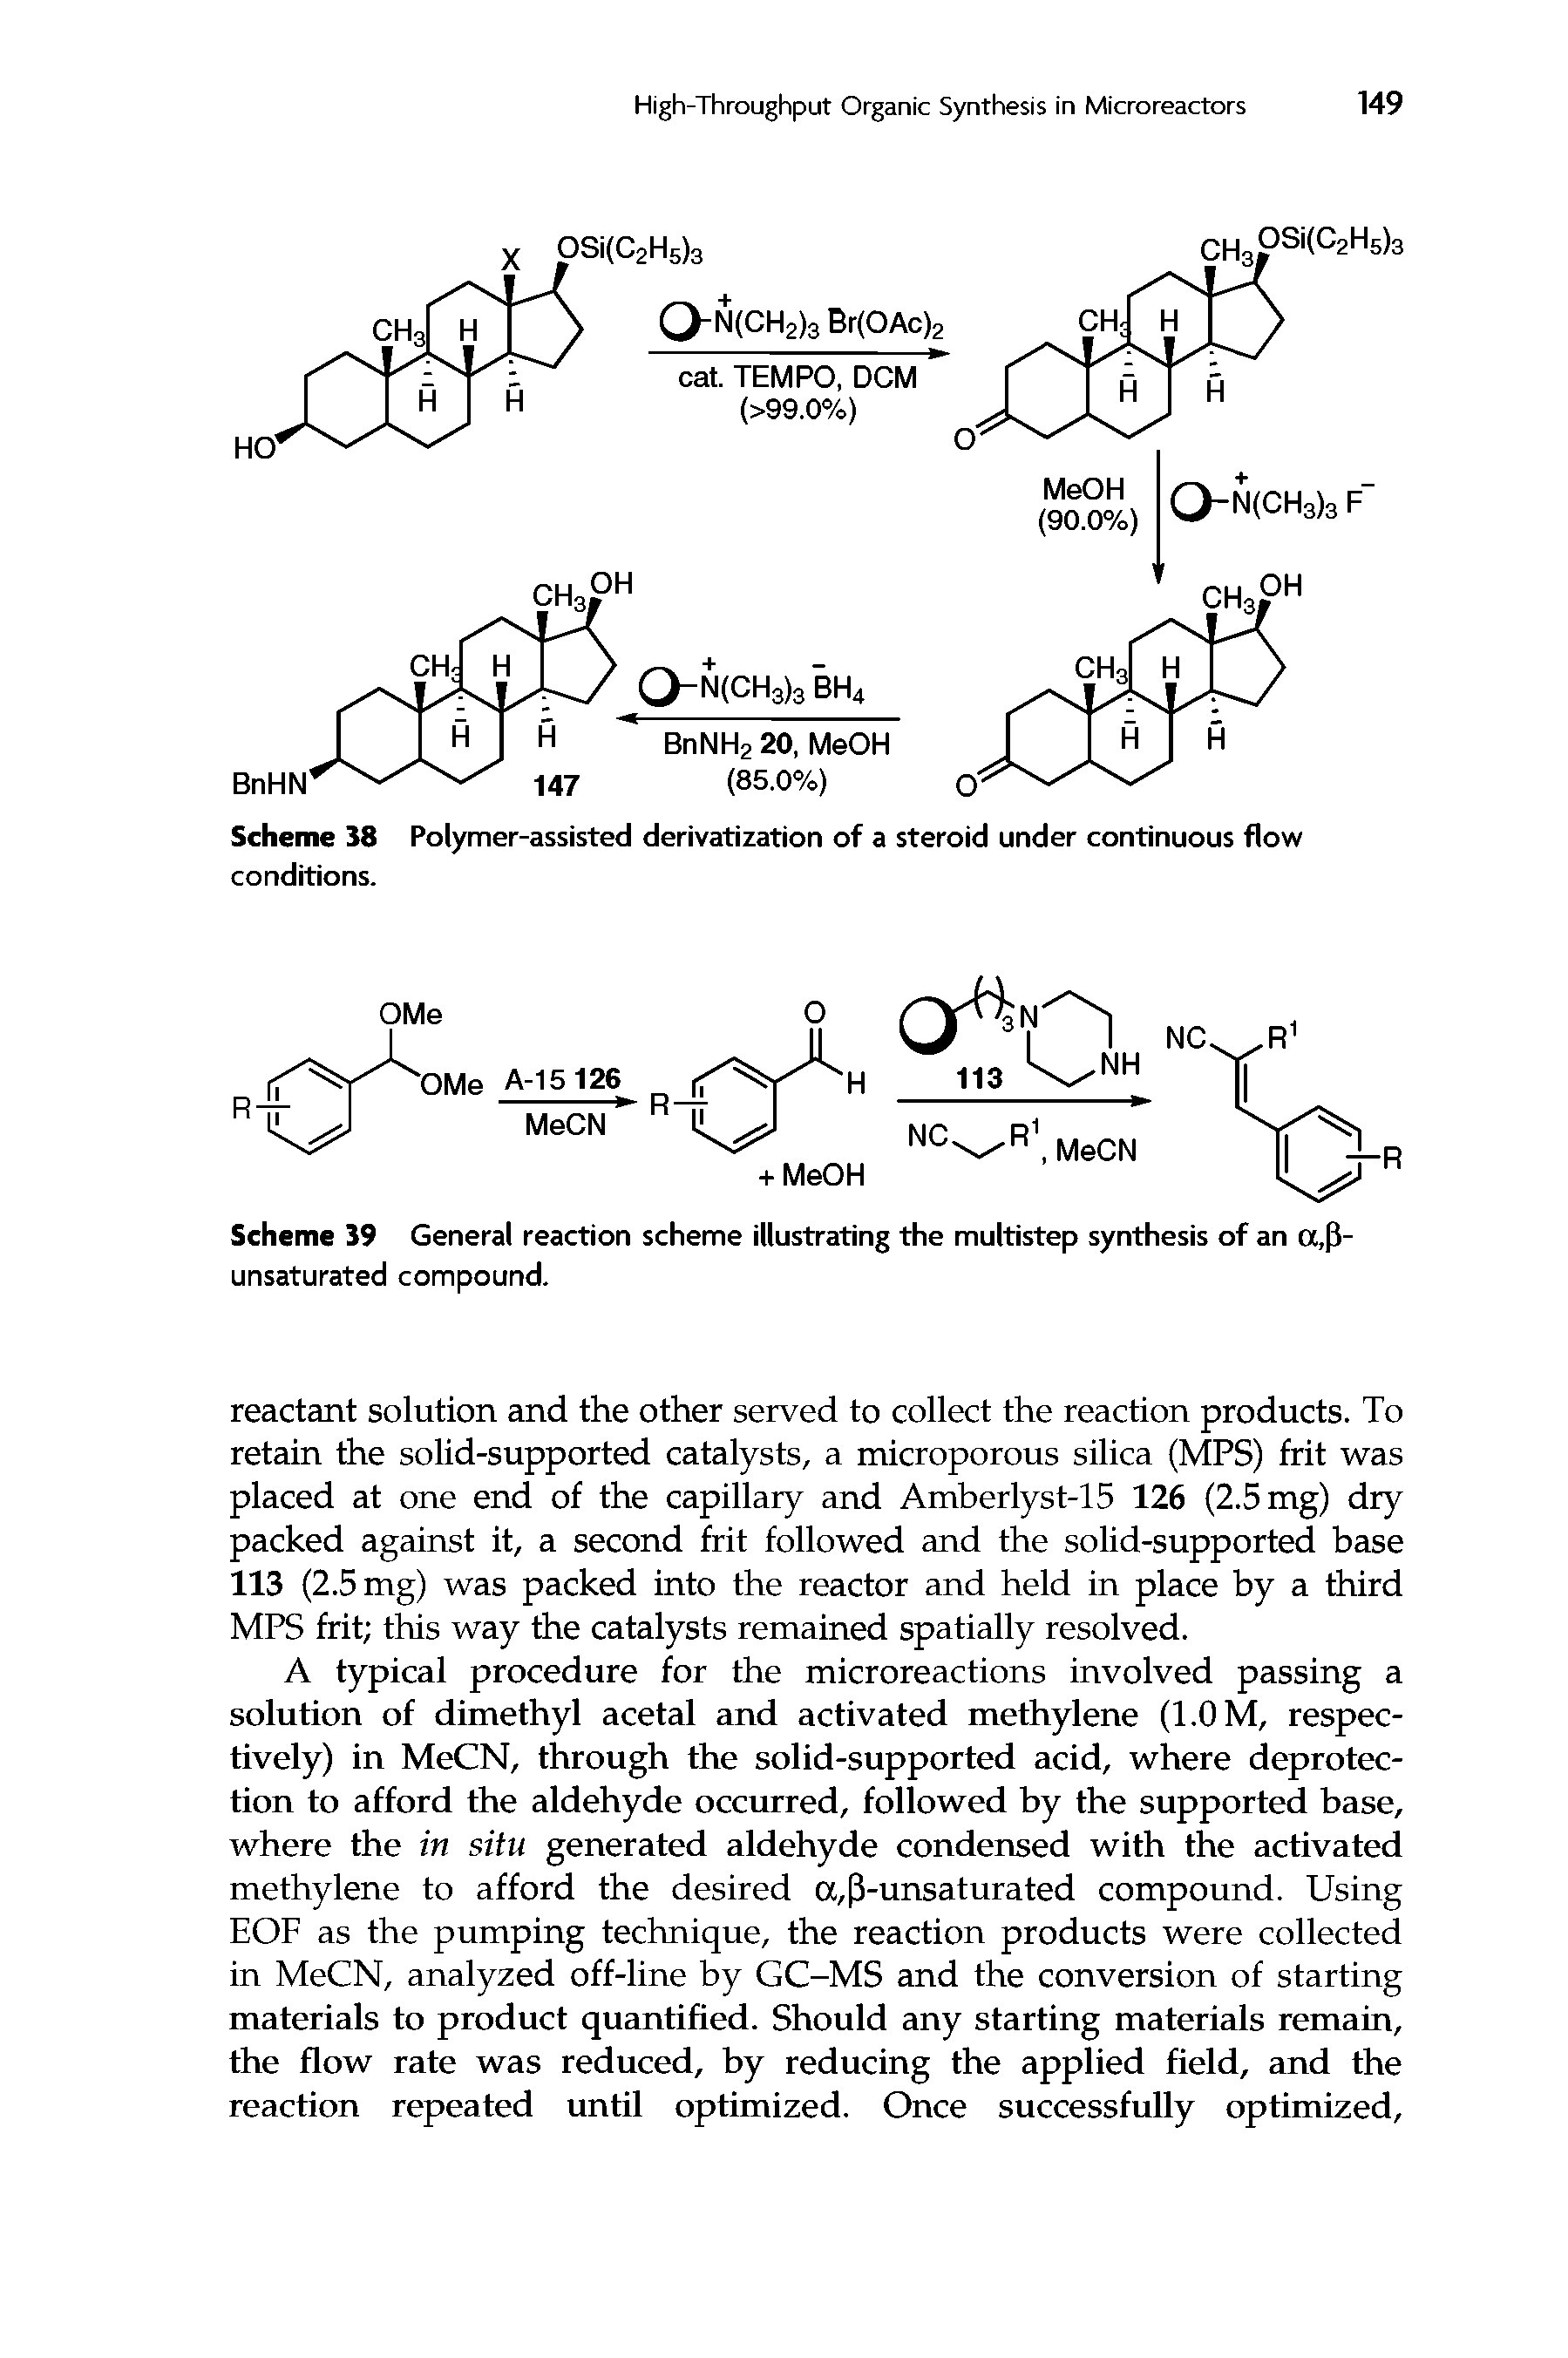 Scheme 38 Polymer-assisted derivatization of a steroid under continuous flow conditions.